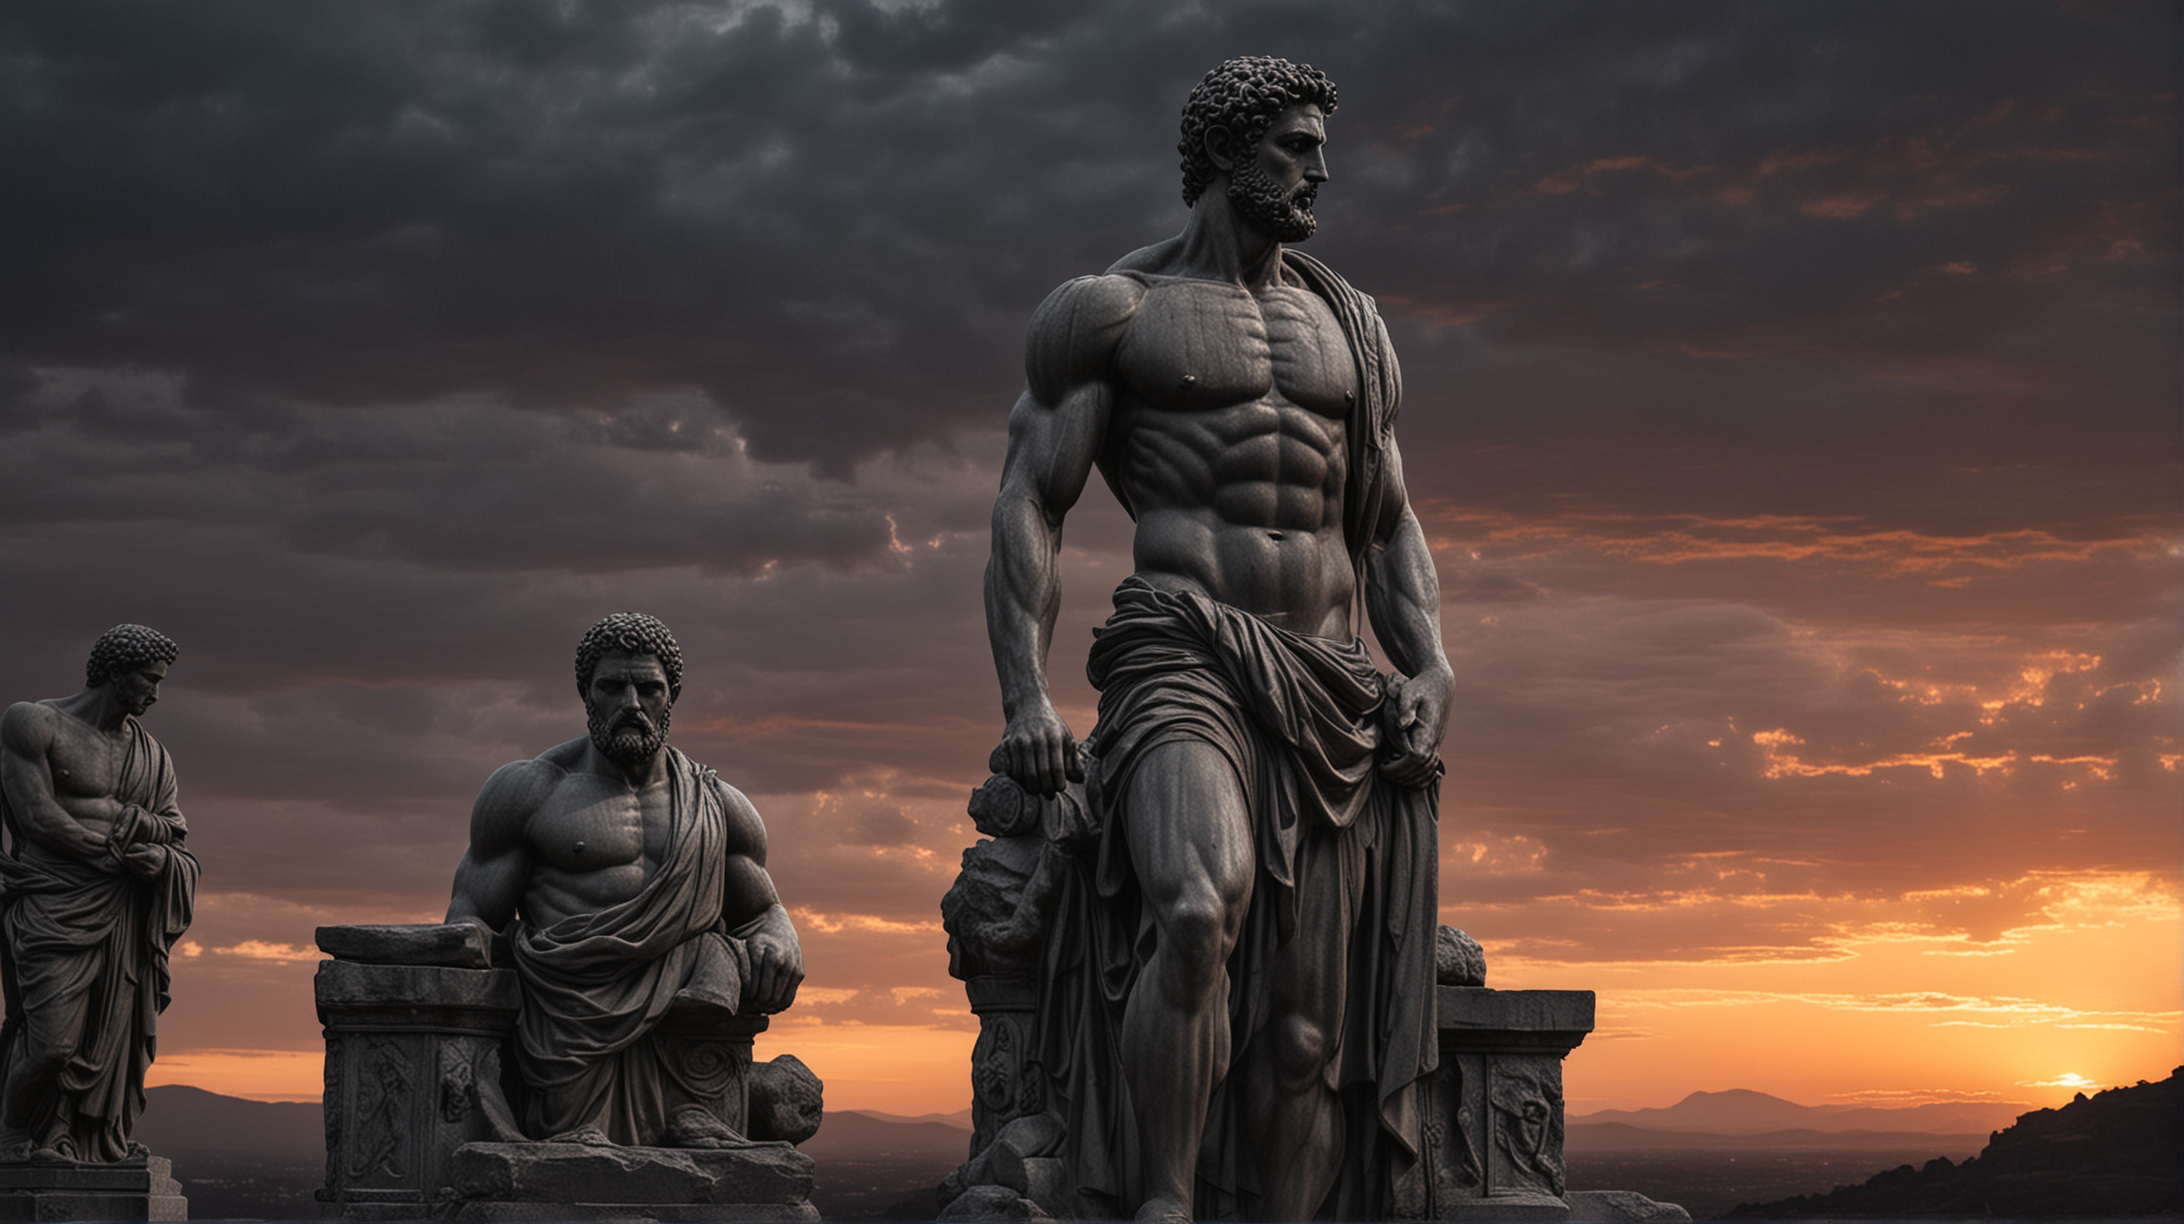 Stoic Muscular Statues at Dark Sunset